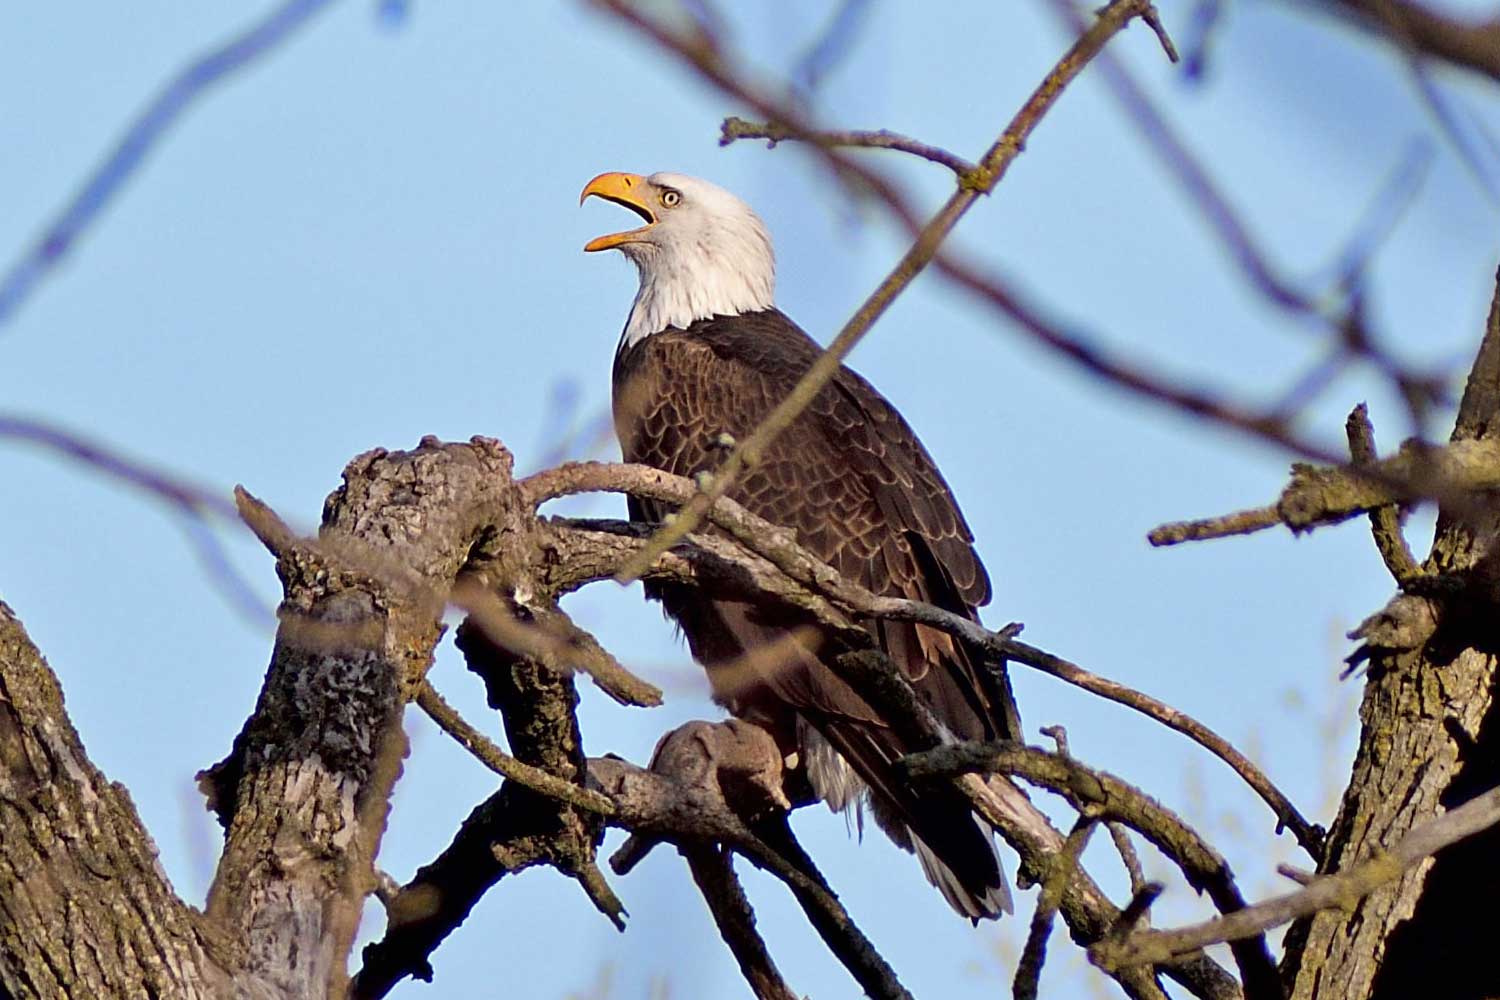 A bald eagle in a tree with its mouth open.